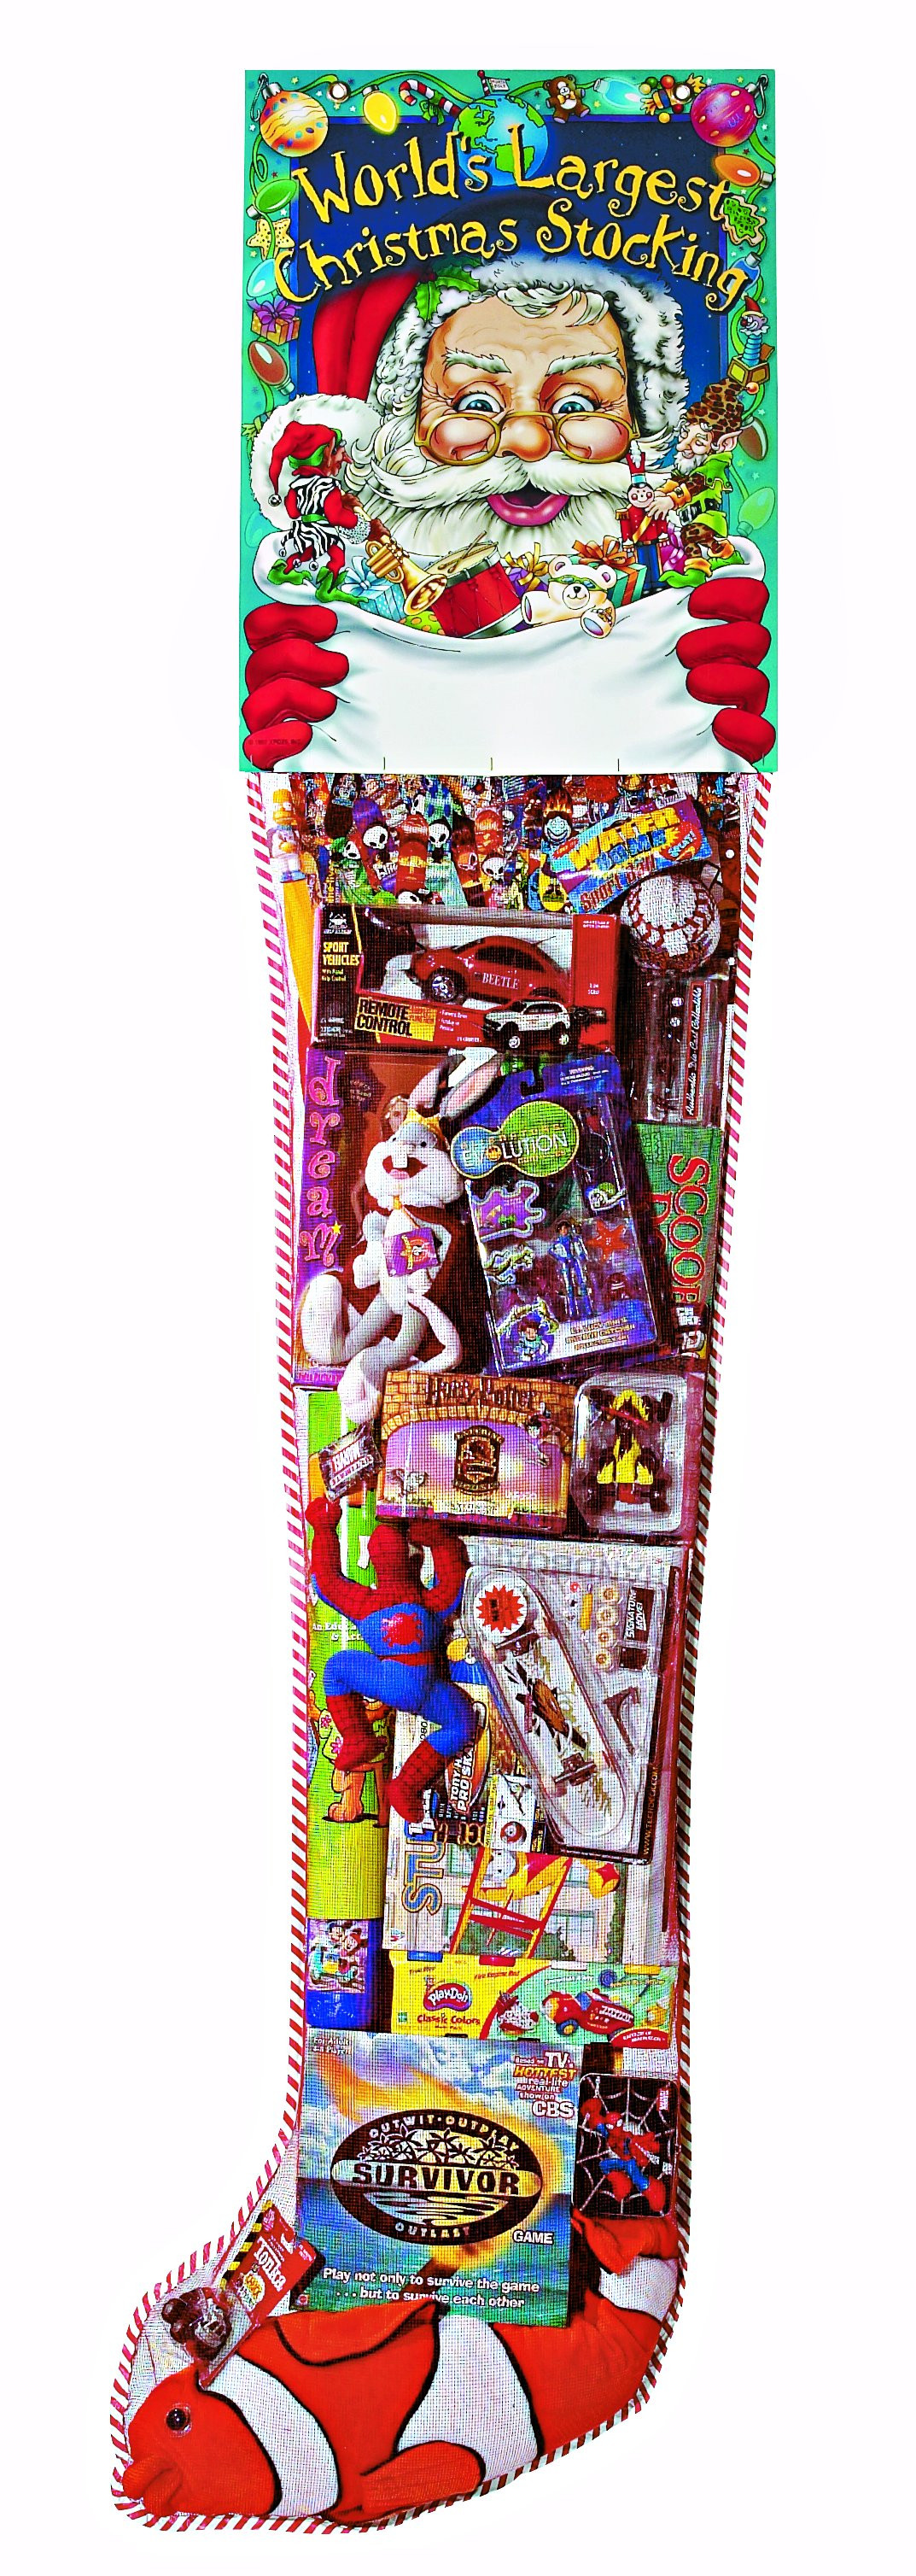 Candy Filled Christmas Stockings Wholesale
 GIANT TOY FILLED STOCKINGS 6 Foot Stockings